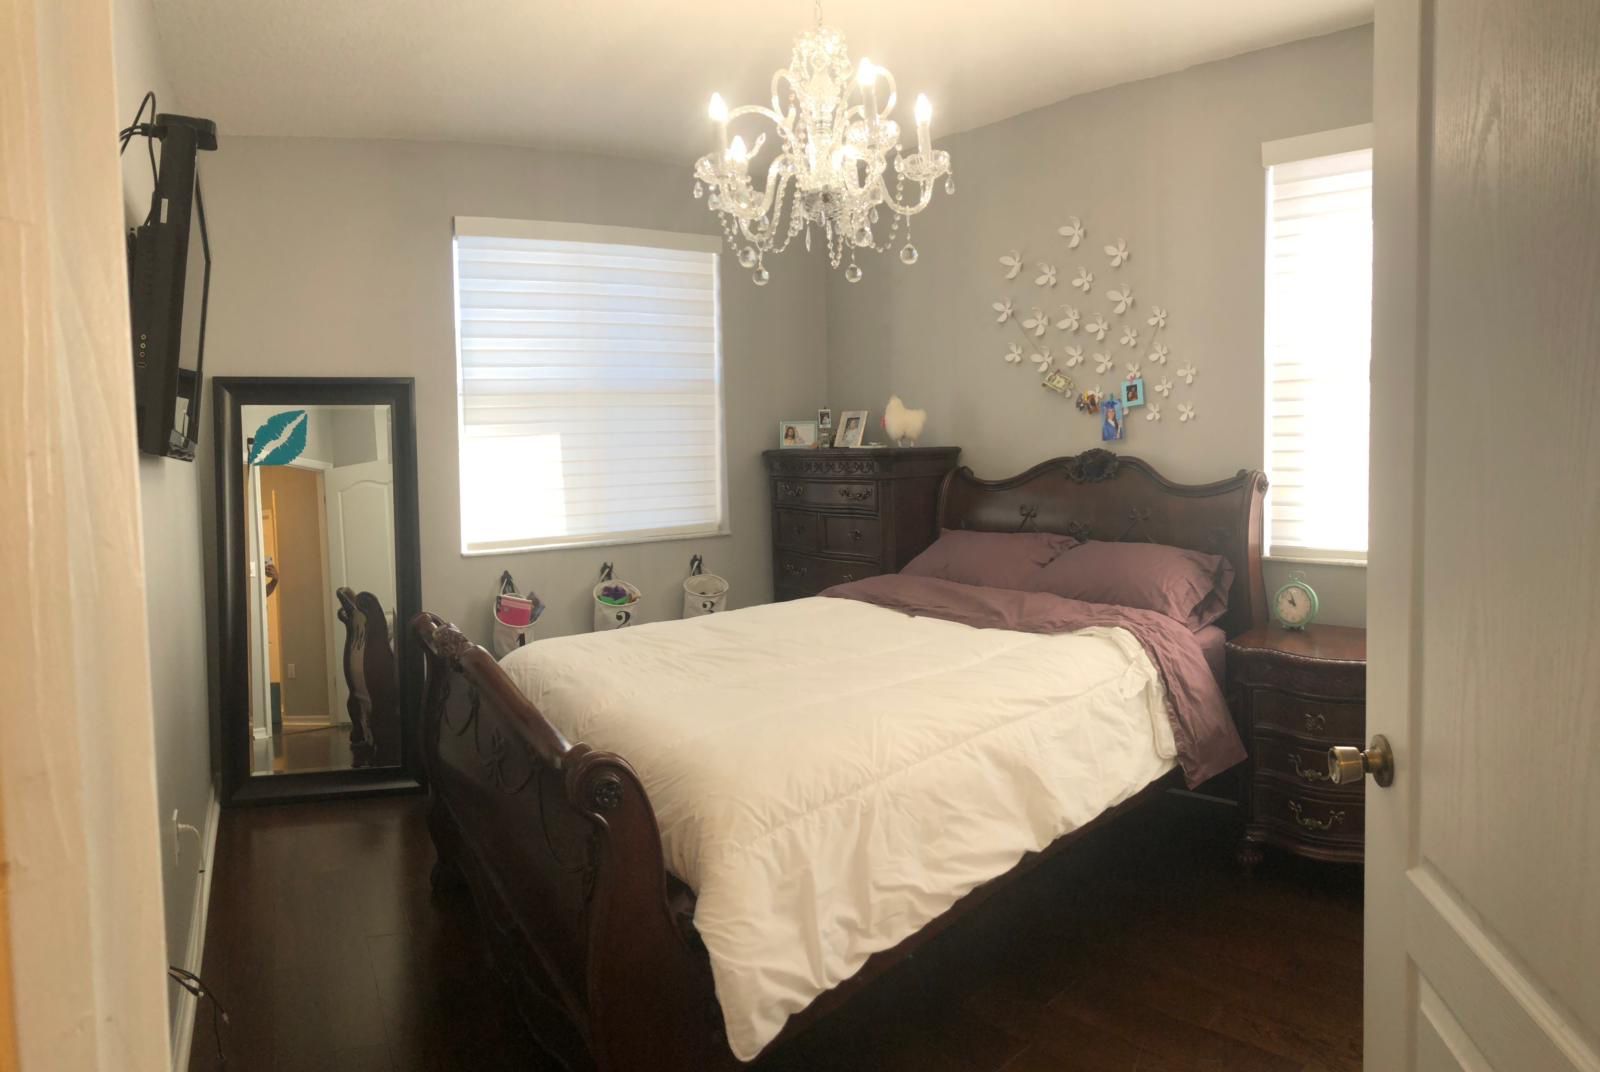 Rooms-To-Go bedroom set (Full bed) like new condition. Dark wood, no scratches. Girl’s bedroom set, mattress, dresser and nightstand